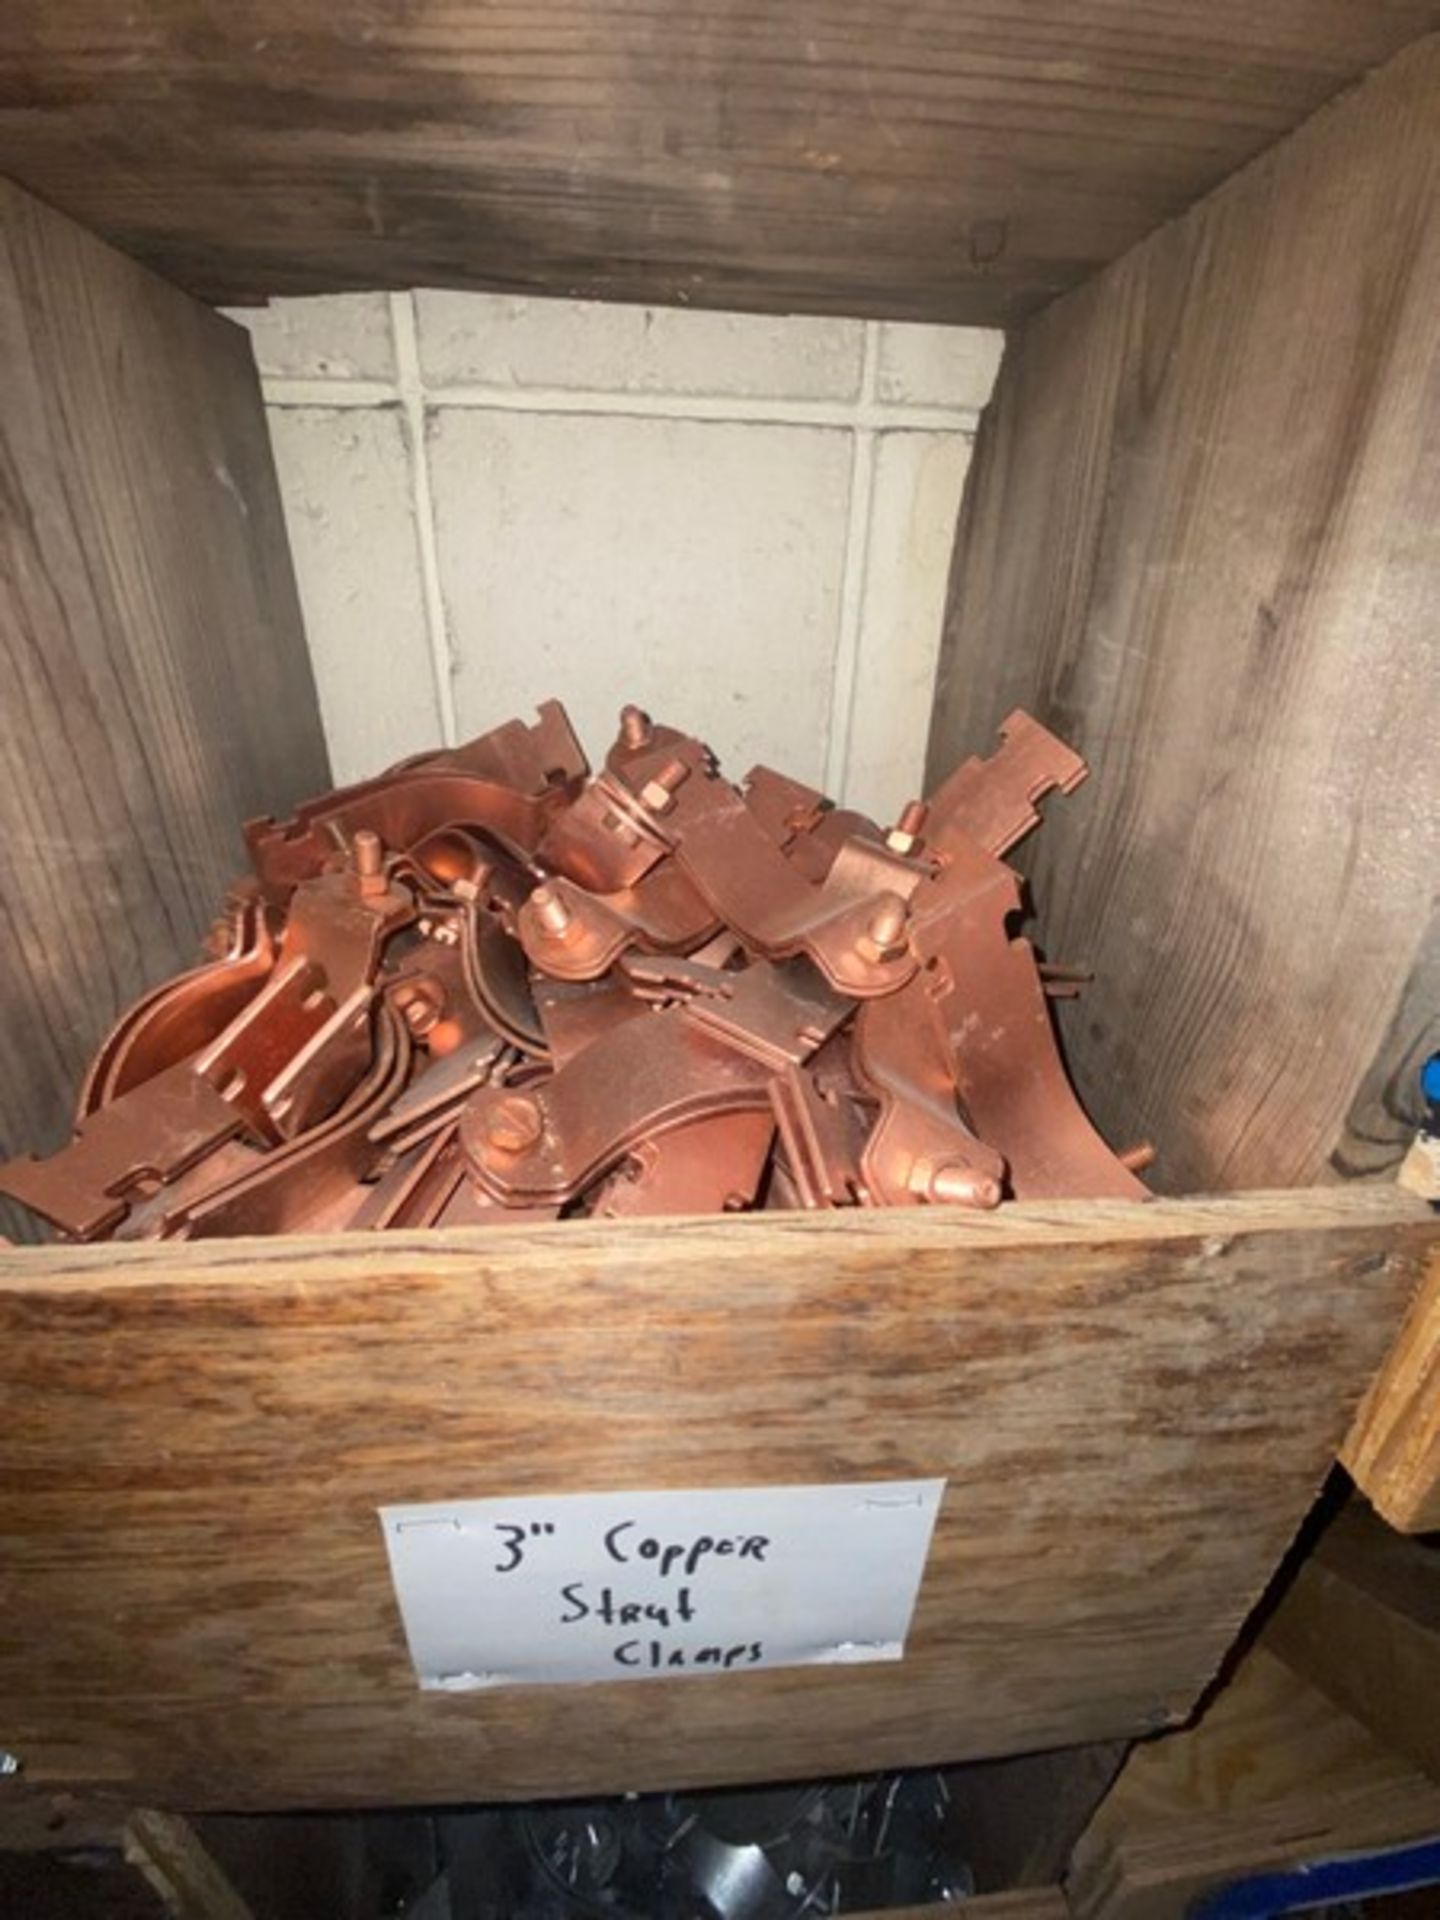 Contents of (25) Cubby's, Includes 1-1/4" Copper Strut Clamps, 3-1/2" Strut Clamps, 4" Copper - Image 18 of 28